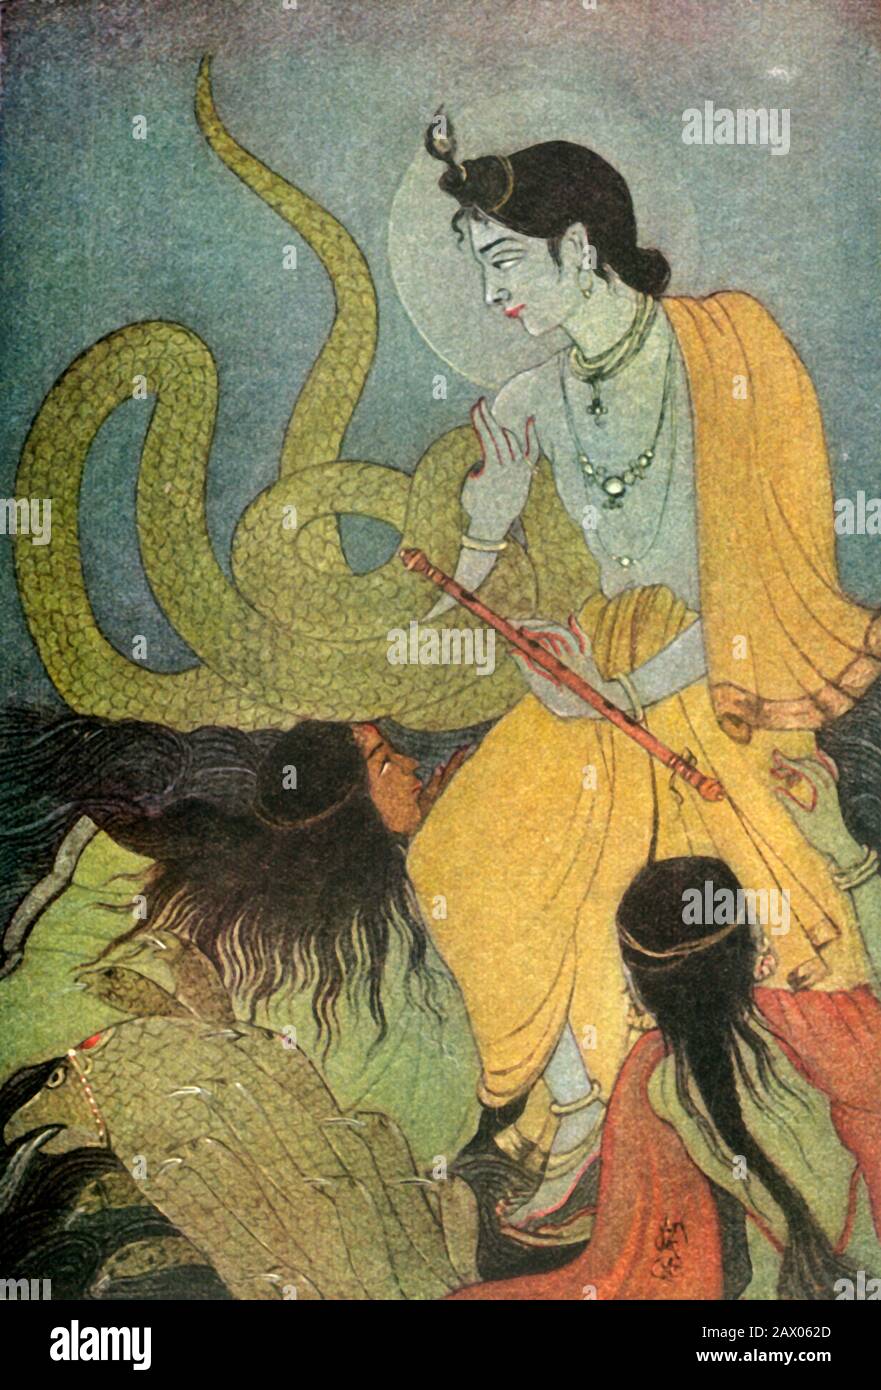 'Kaliya Damana', 1920. In Hindu tradition, Kaliya was a poisonous Naga living in the Yamuna river near Vrindavan.The tale of Lord Krishna dancing and subduing Kaliya is told in the Bhagavata Purana. From &quot;Myths of the Hindus &amp; Buddhists&quot;, by The Sister Nivedita and Ananda K. Coomaraswamy. [George G. Harrap &amp; Company Ltd, London, 1920] Stock Photo